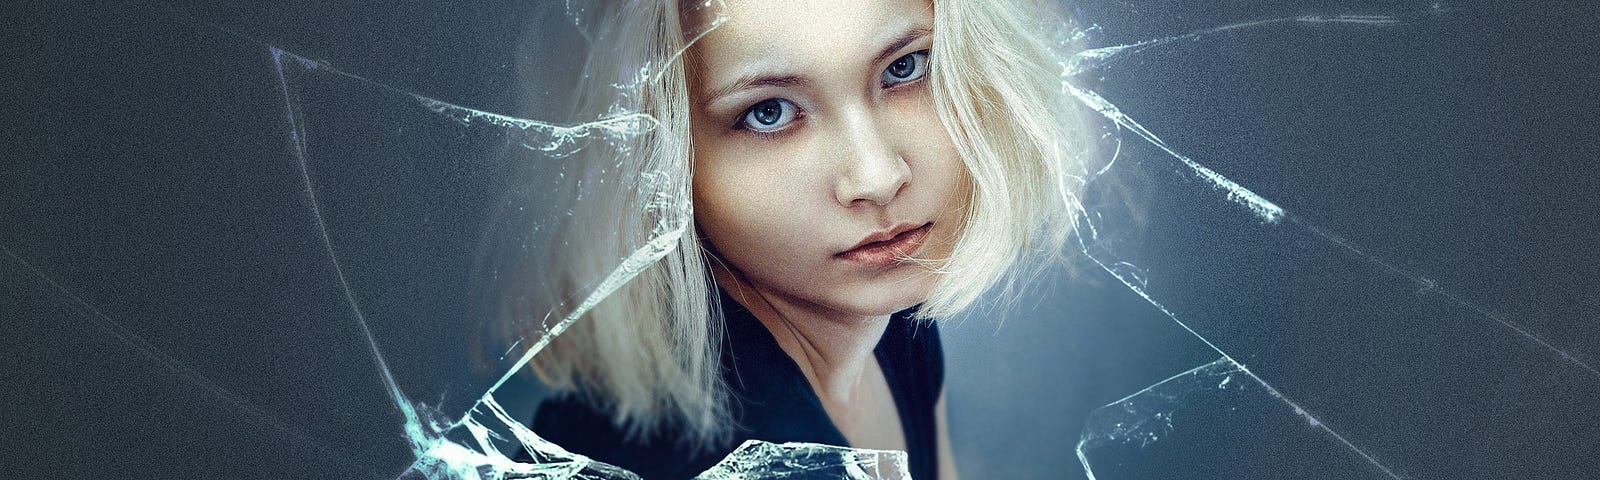 Image of blond girl and broken glass